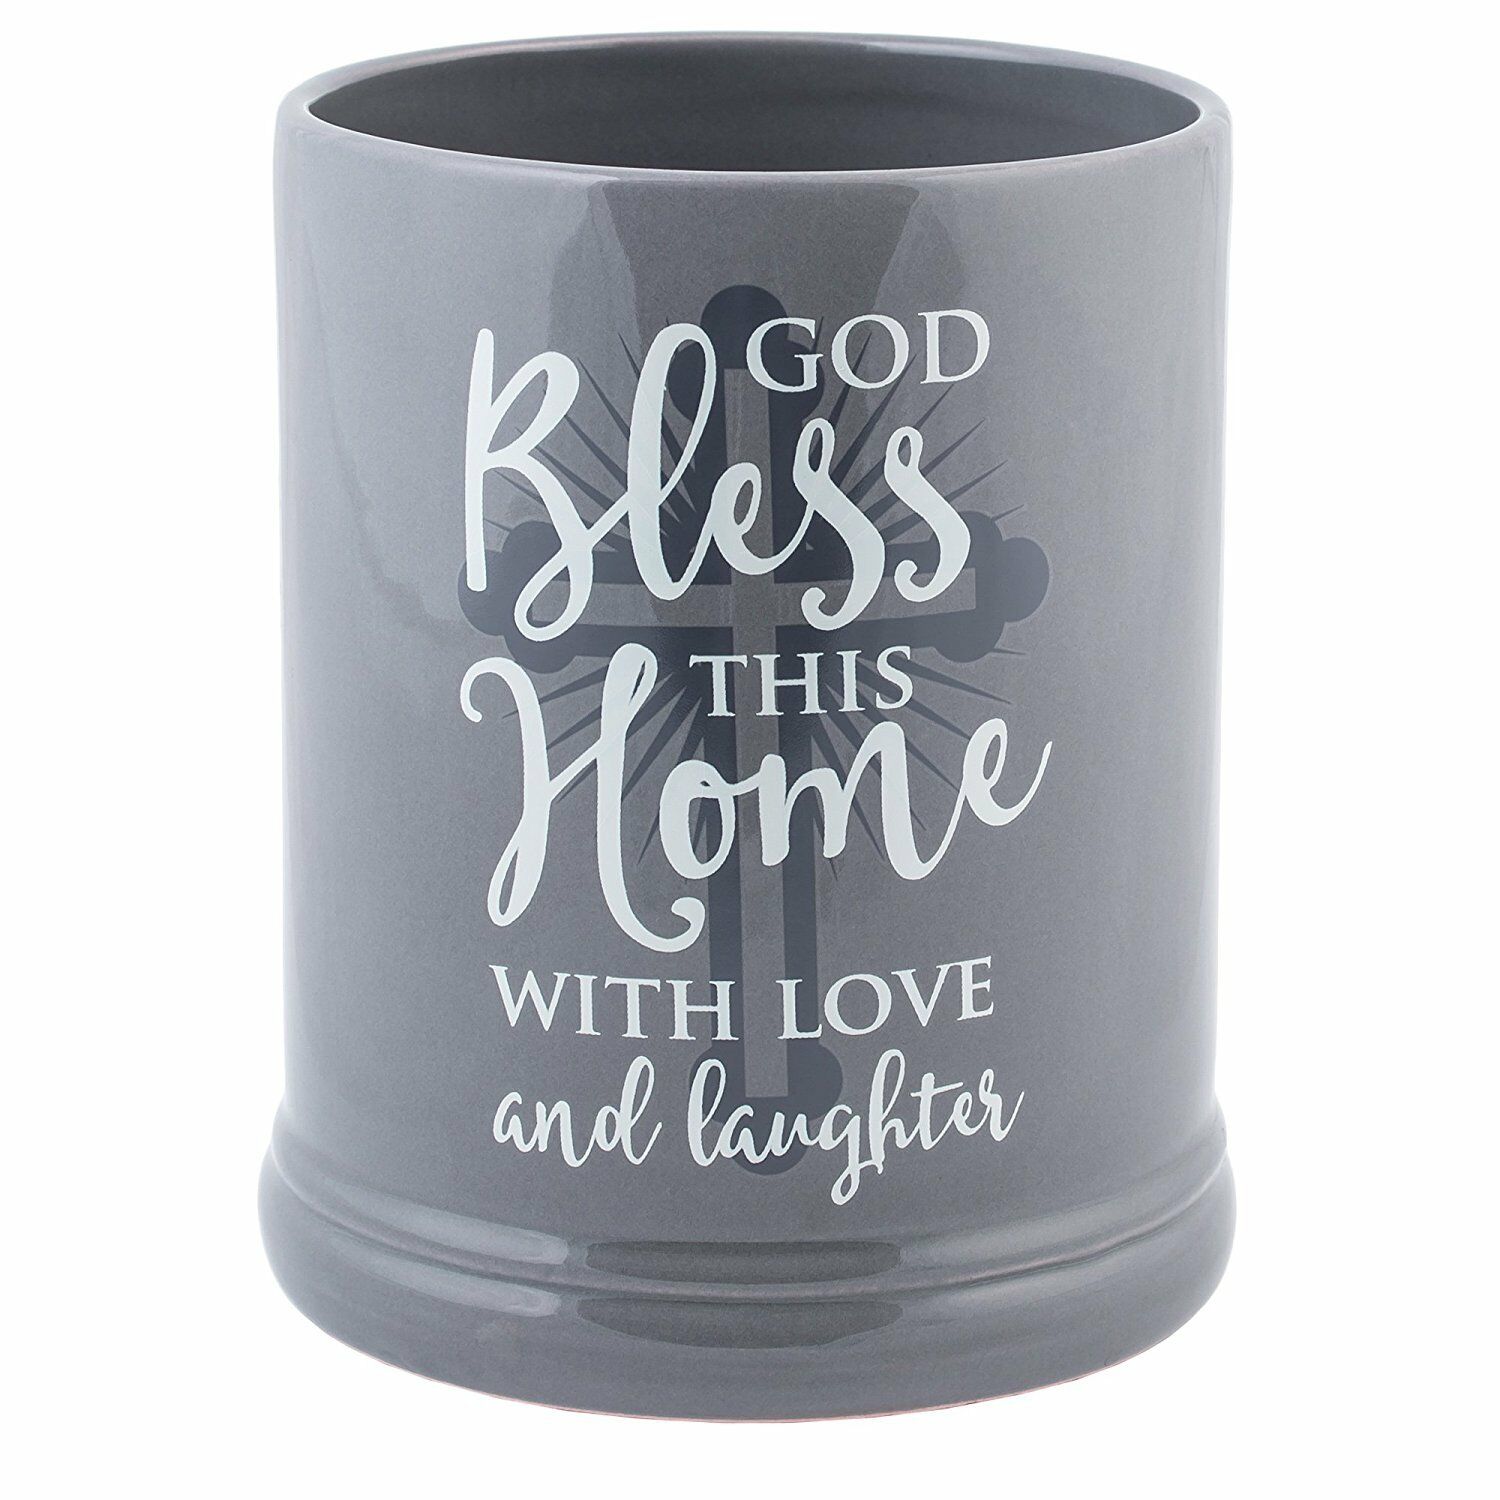 God Bless This Home With Love Grey Ceramic Stone Jar Warmer